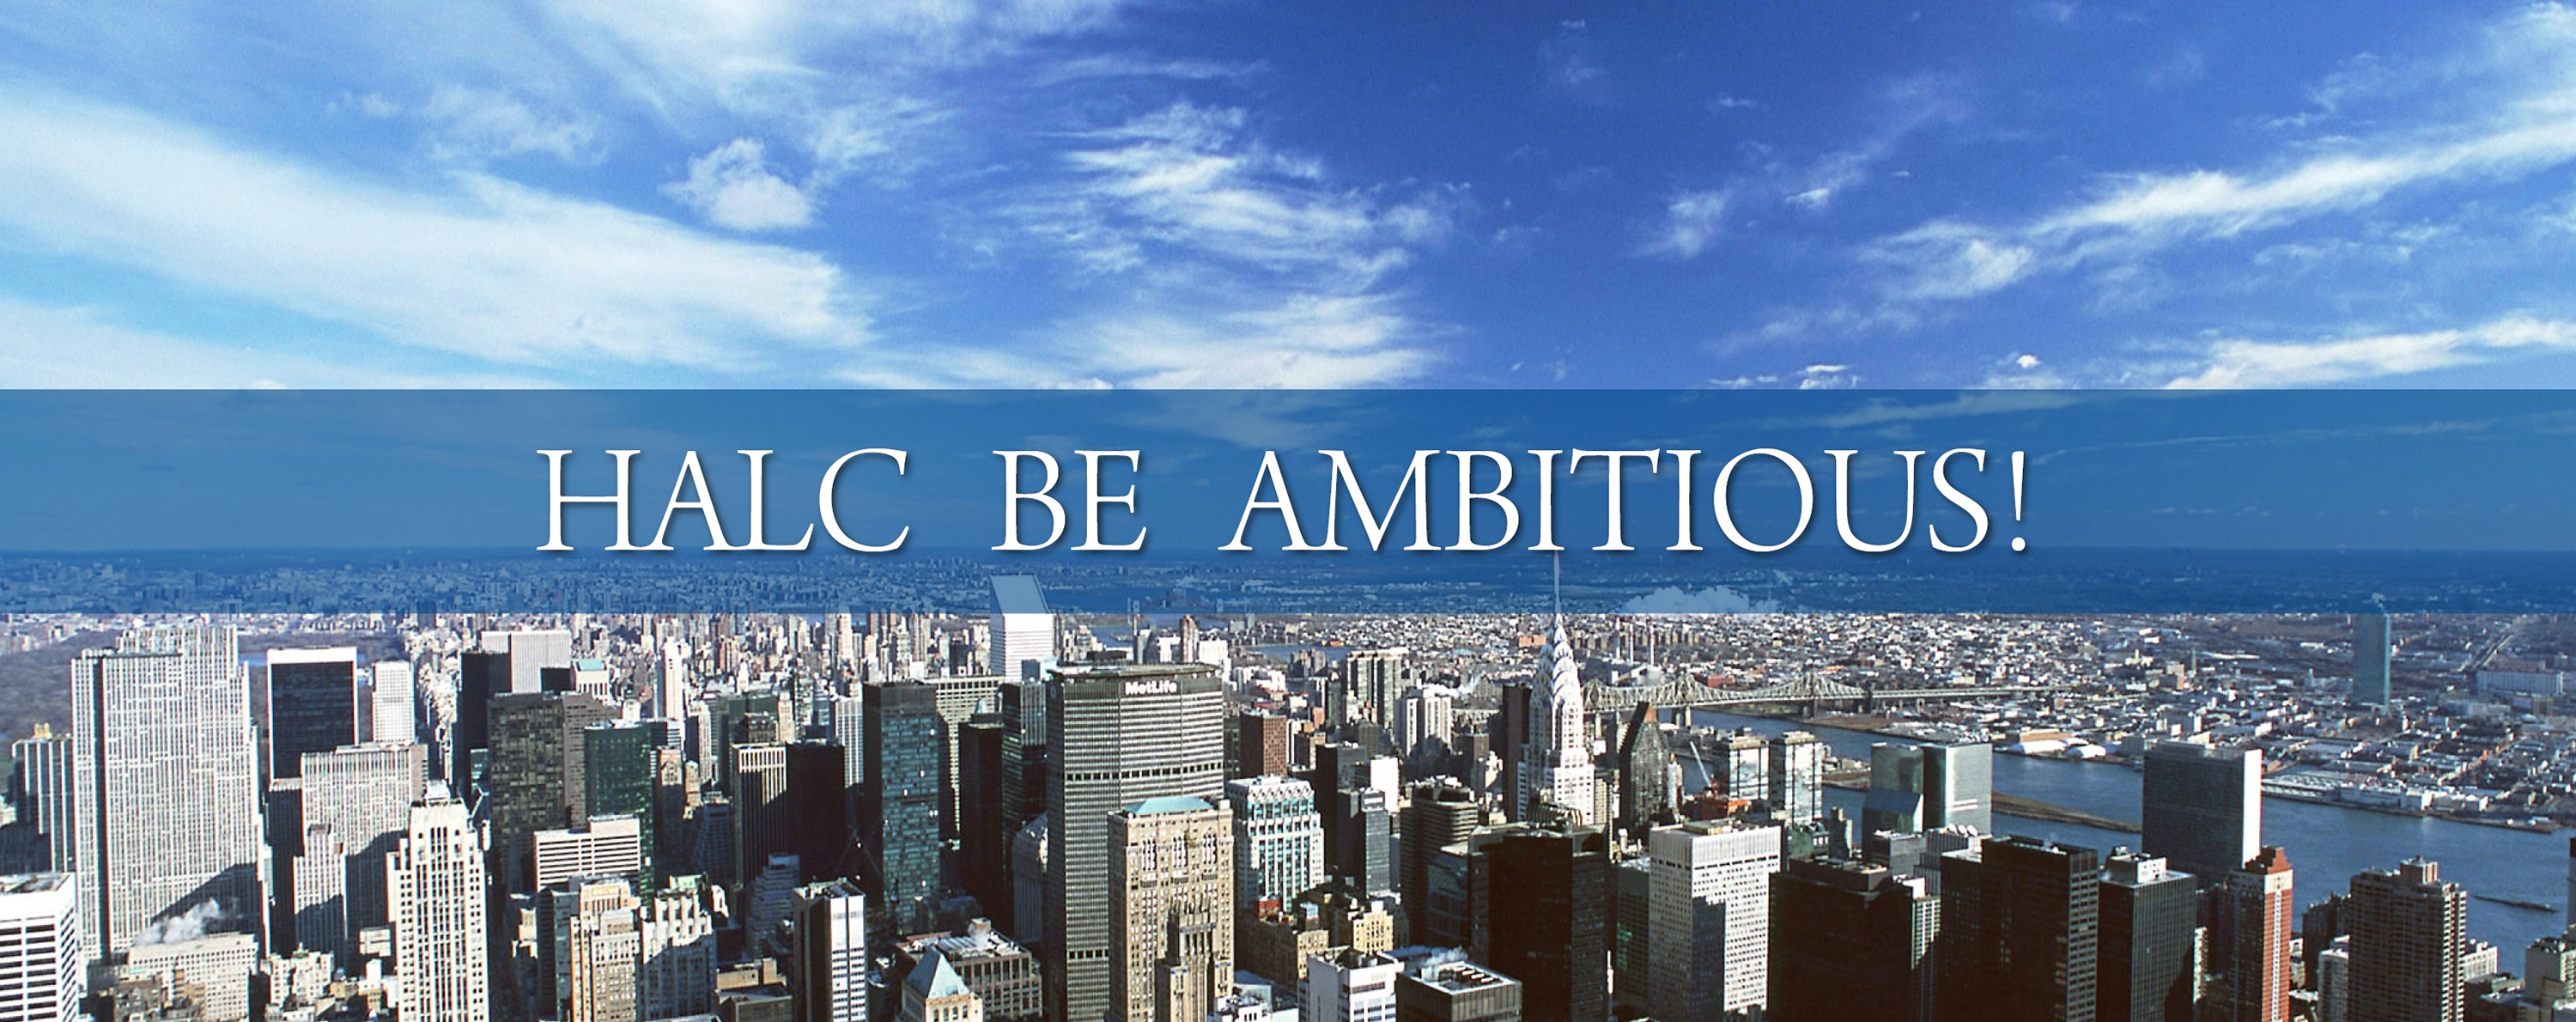 HALC BE AMBITIOUS!